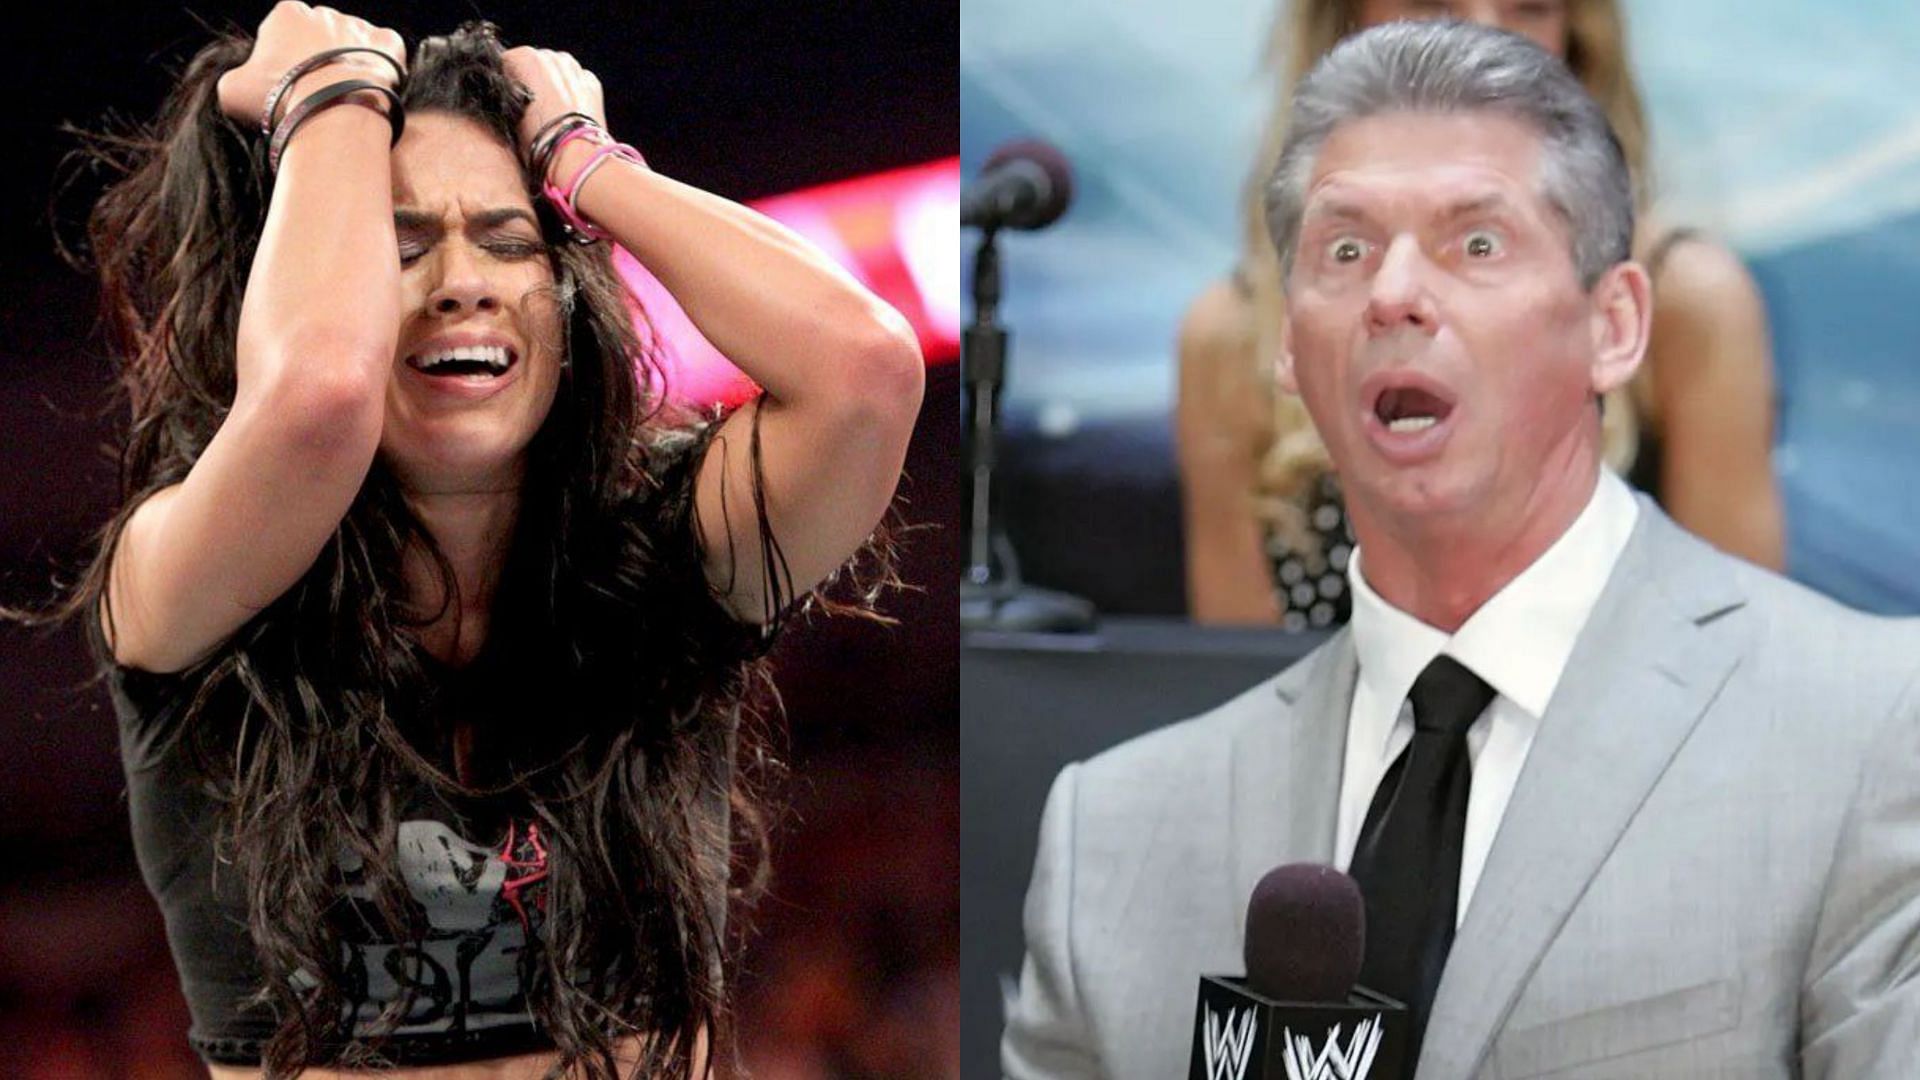 AJ Lee (left) and Vince McMahon (right)